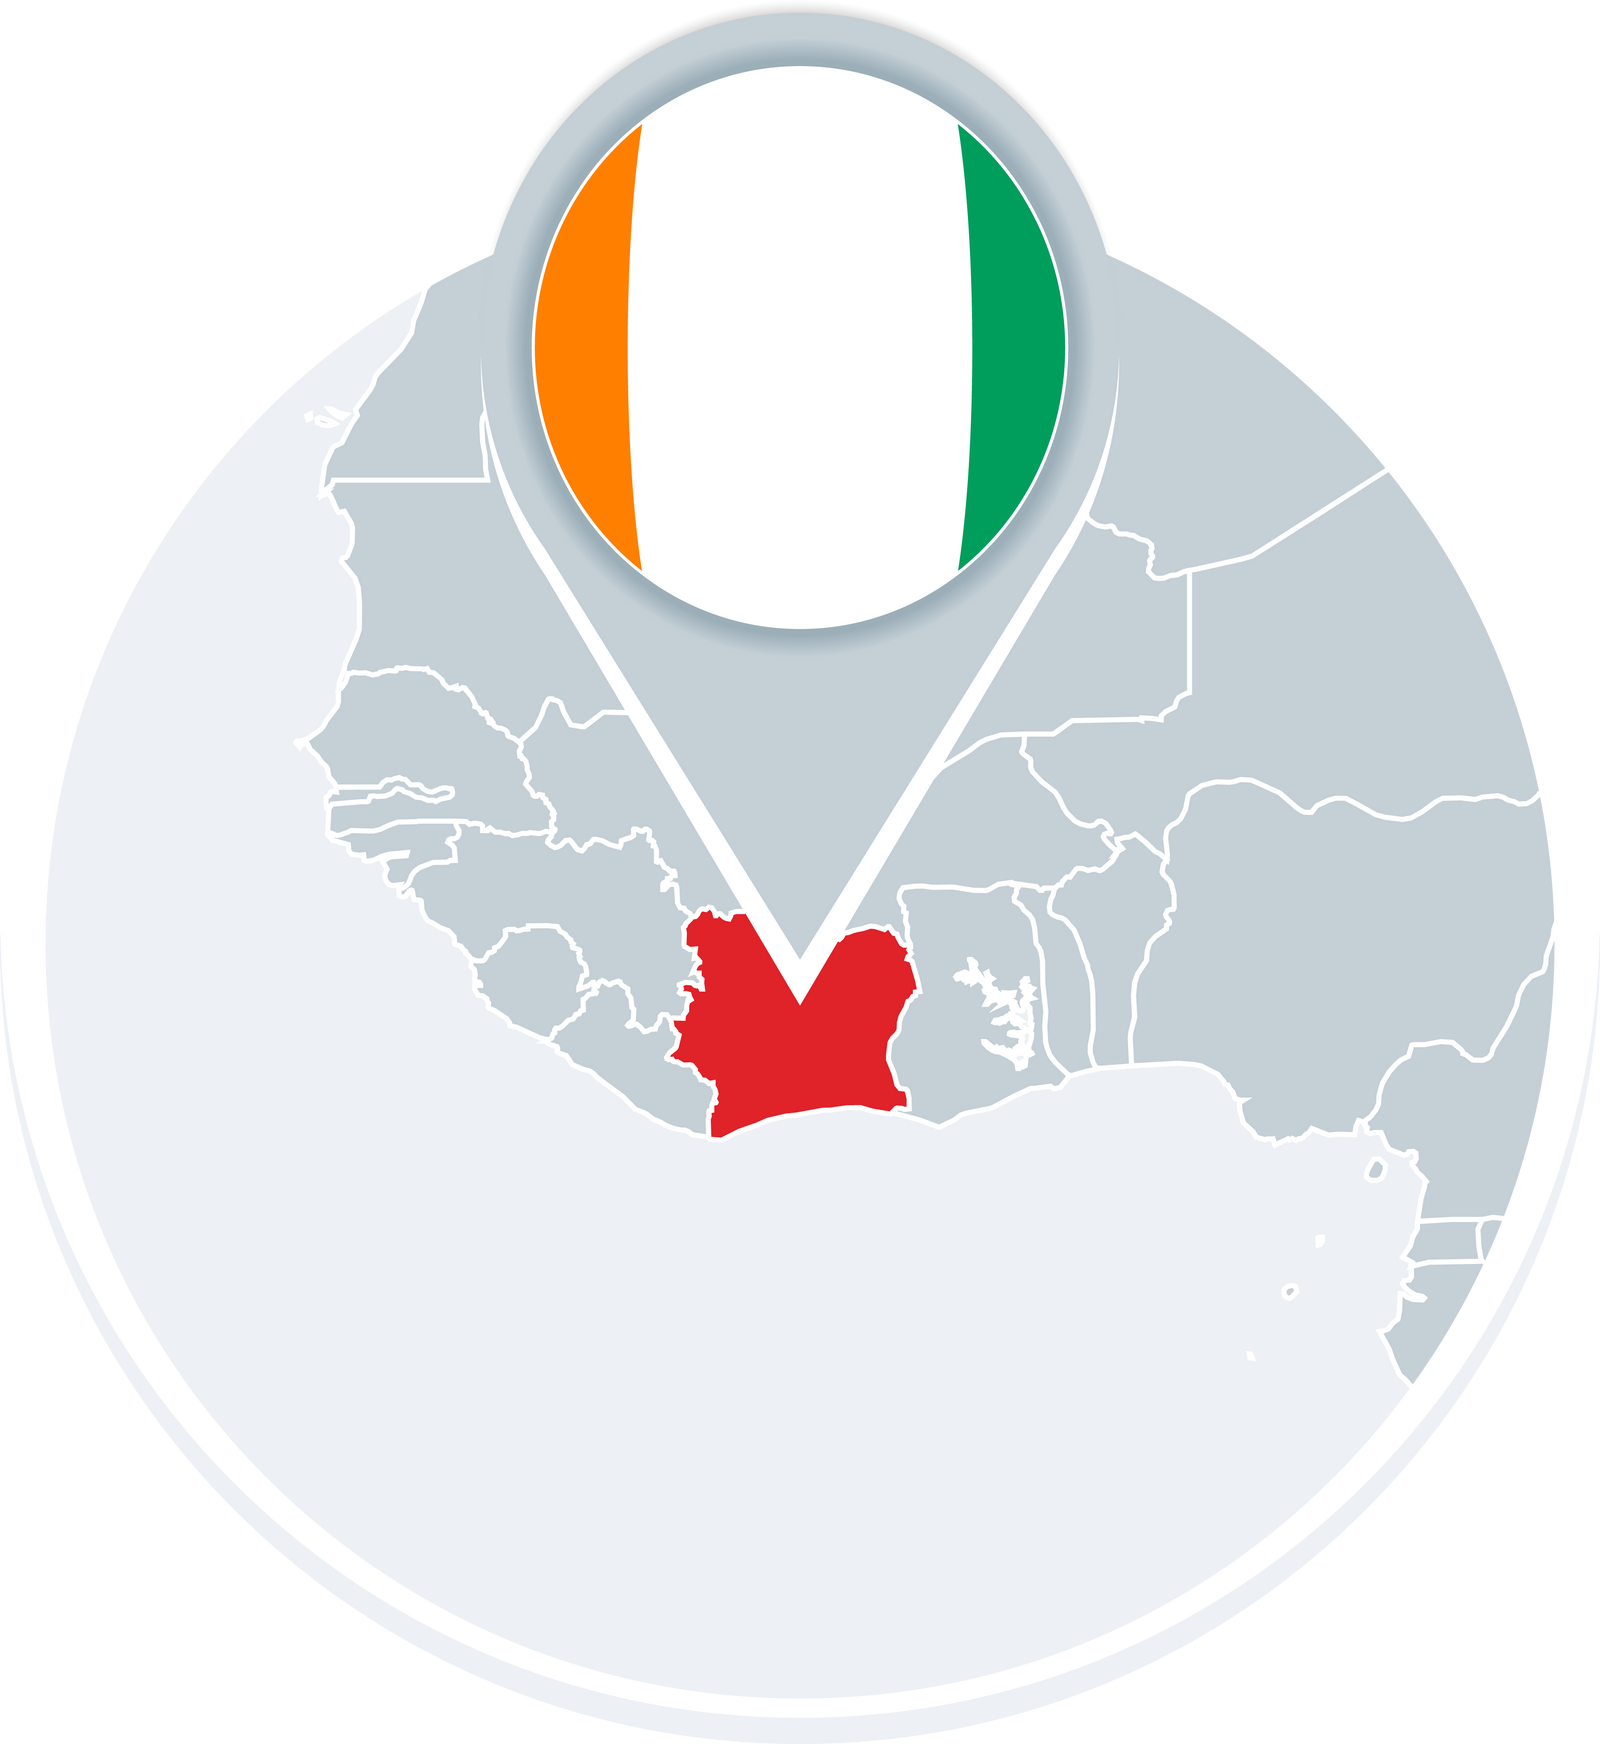 Ivory Coast map and flag, map icon with highlighted Ivory Coast